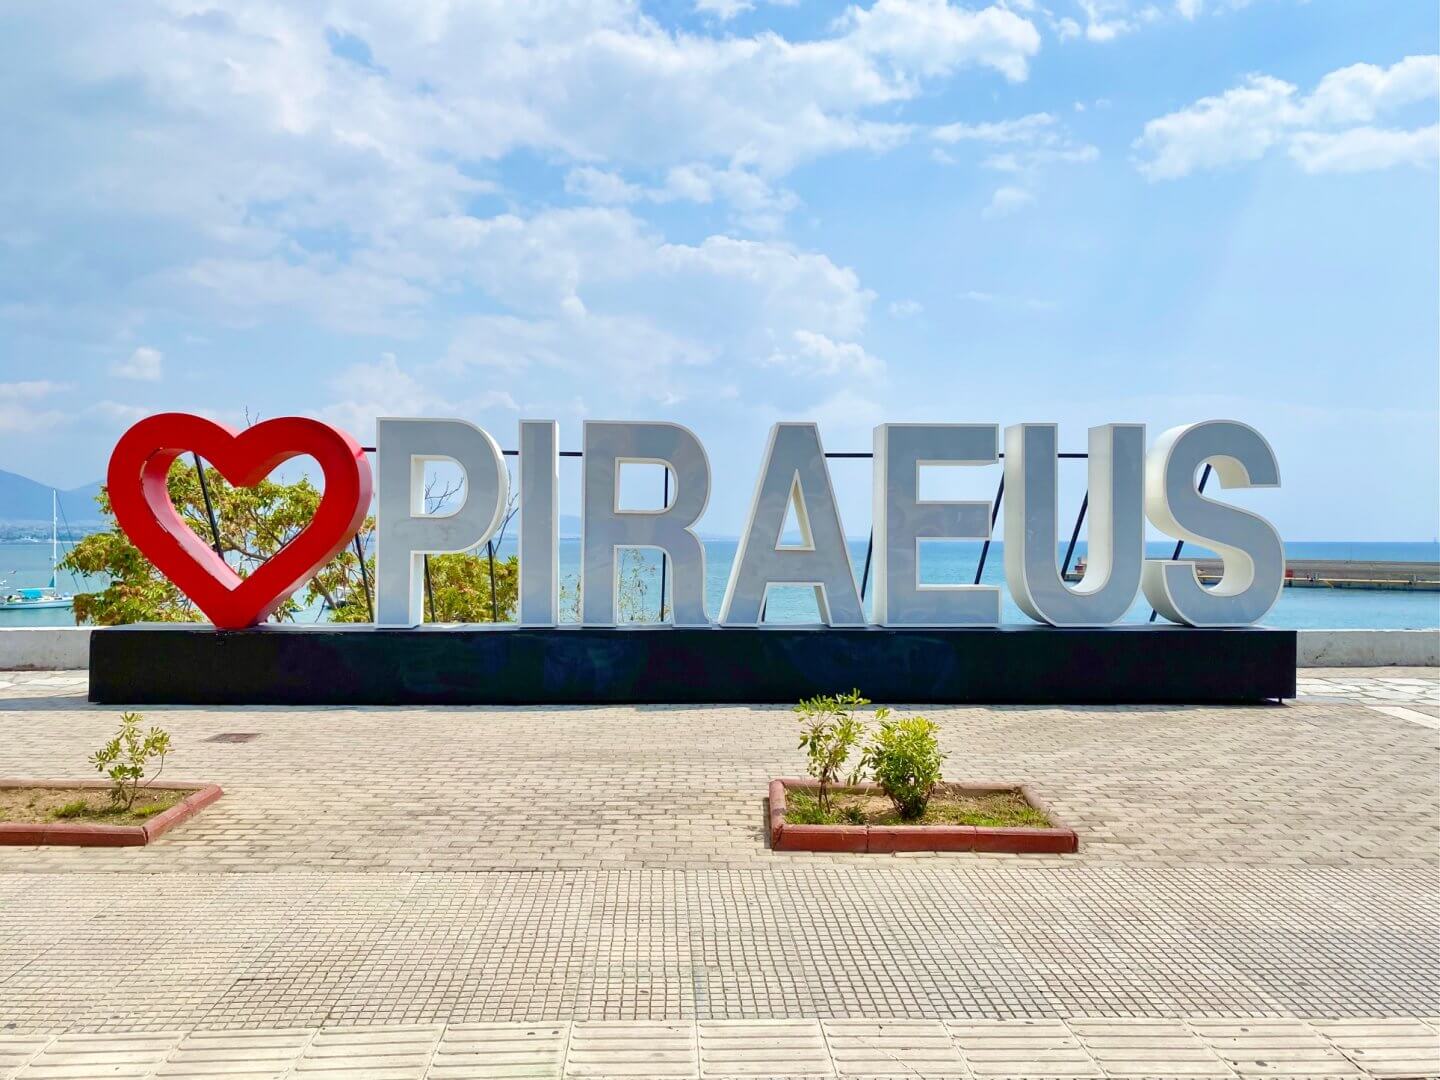 Heart Piraeus sign in front of the sea